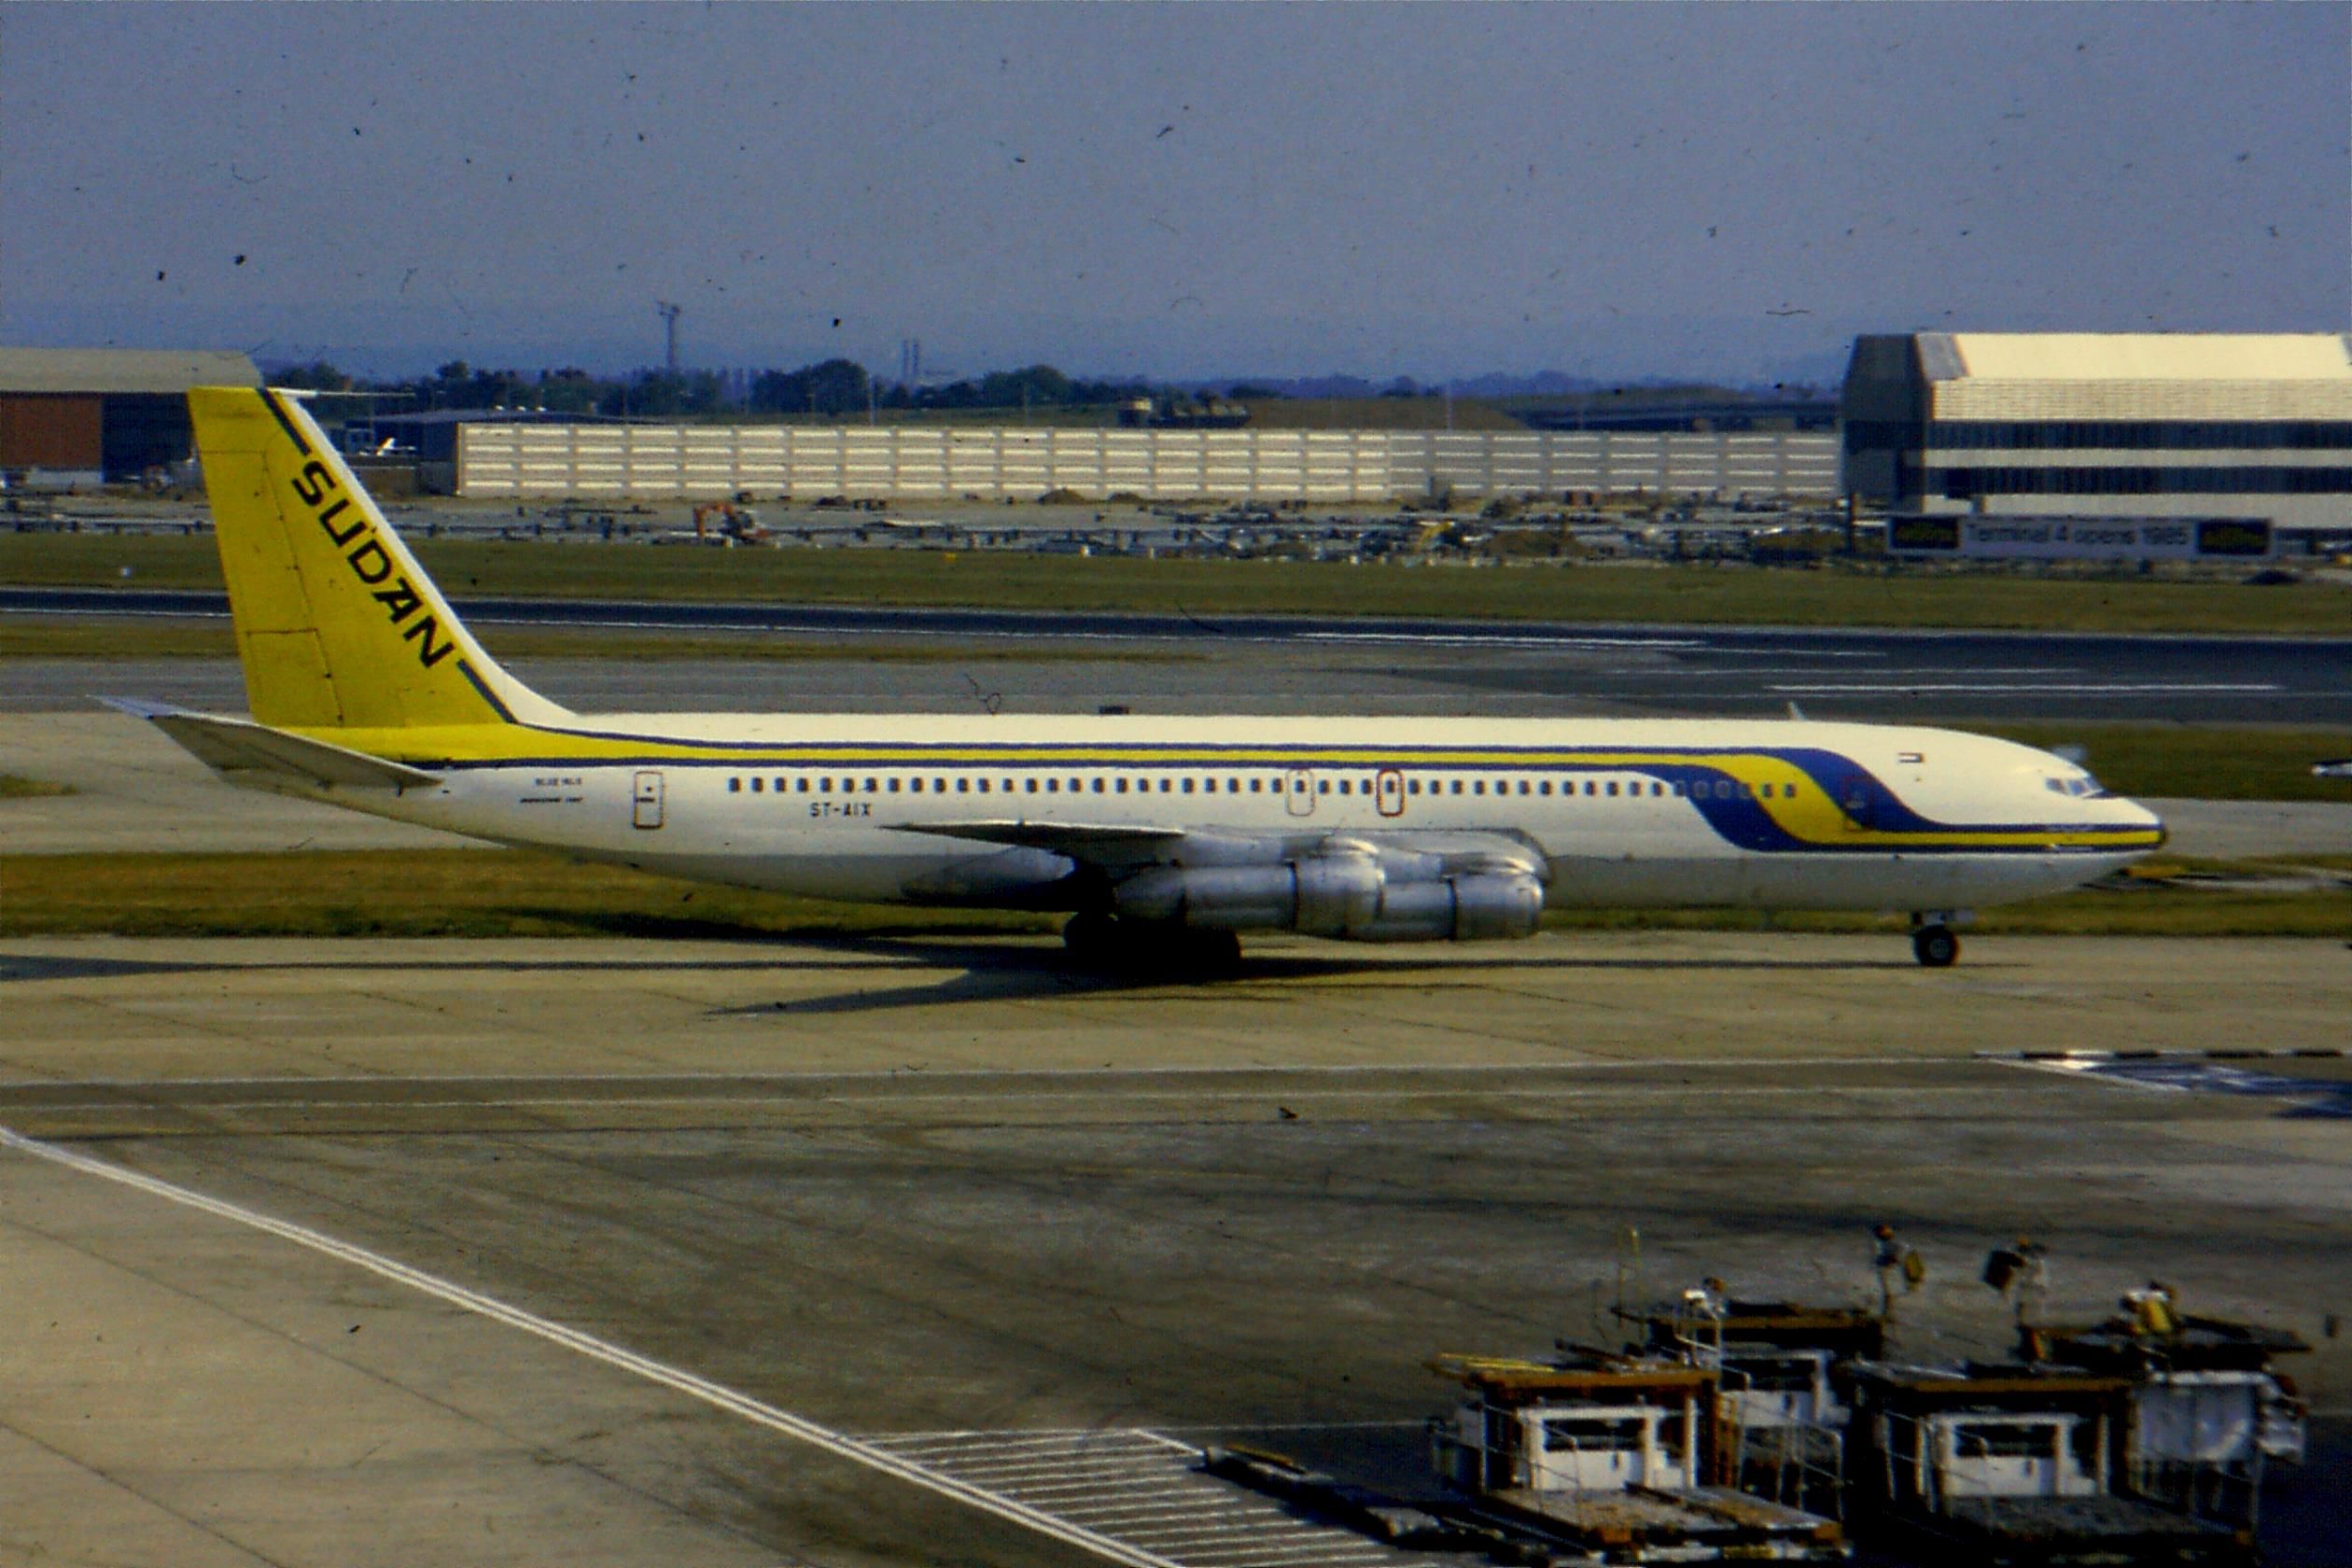 A white jetliner with a yellow tail and Sudan Airways branding in blue parked at an airport